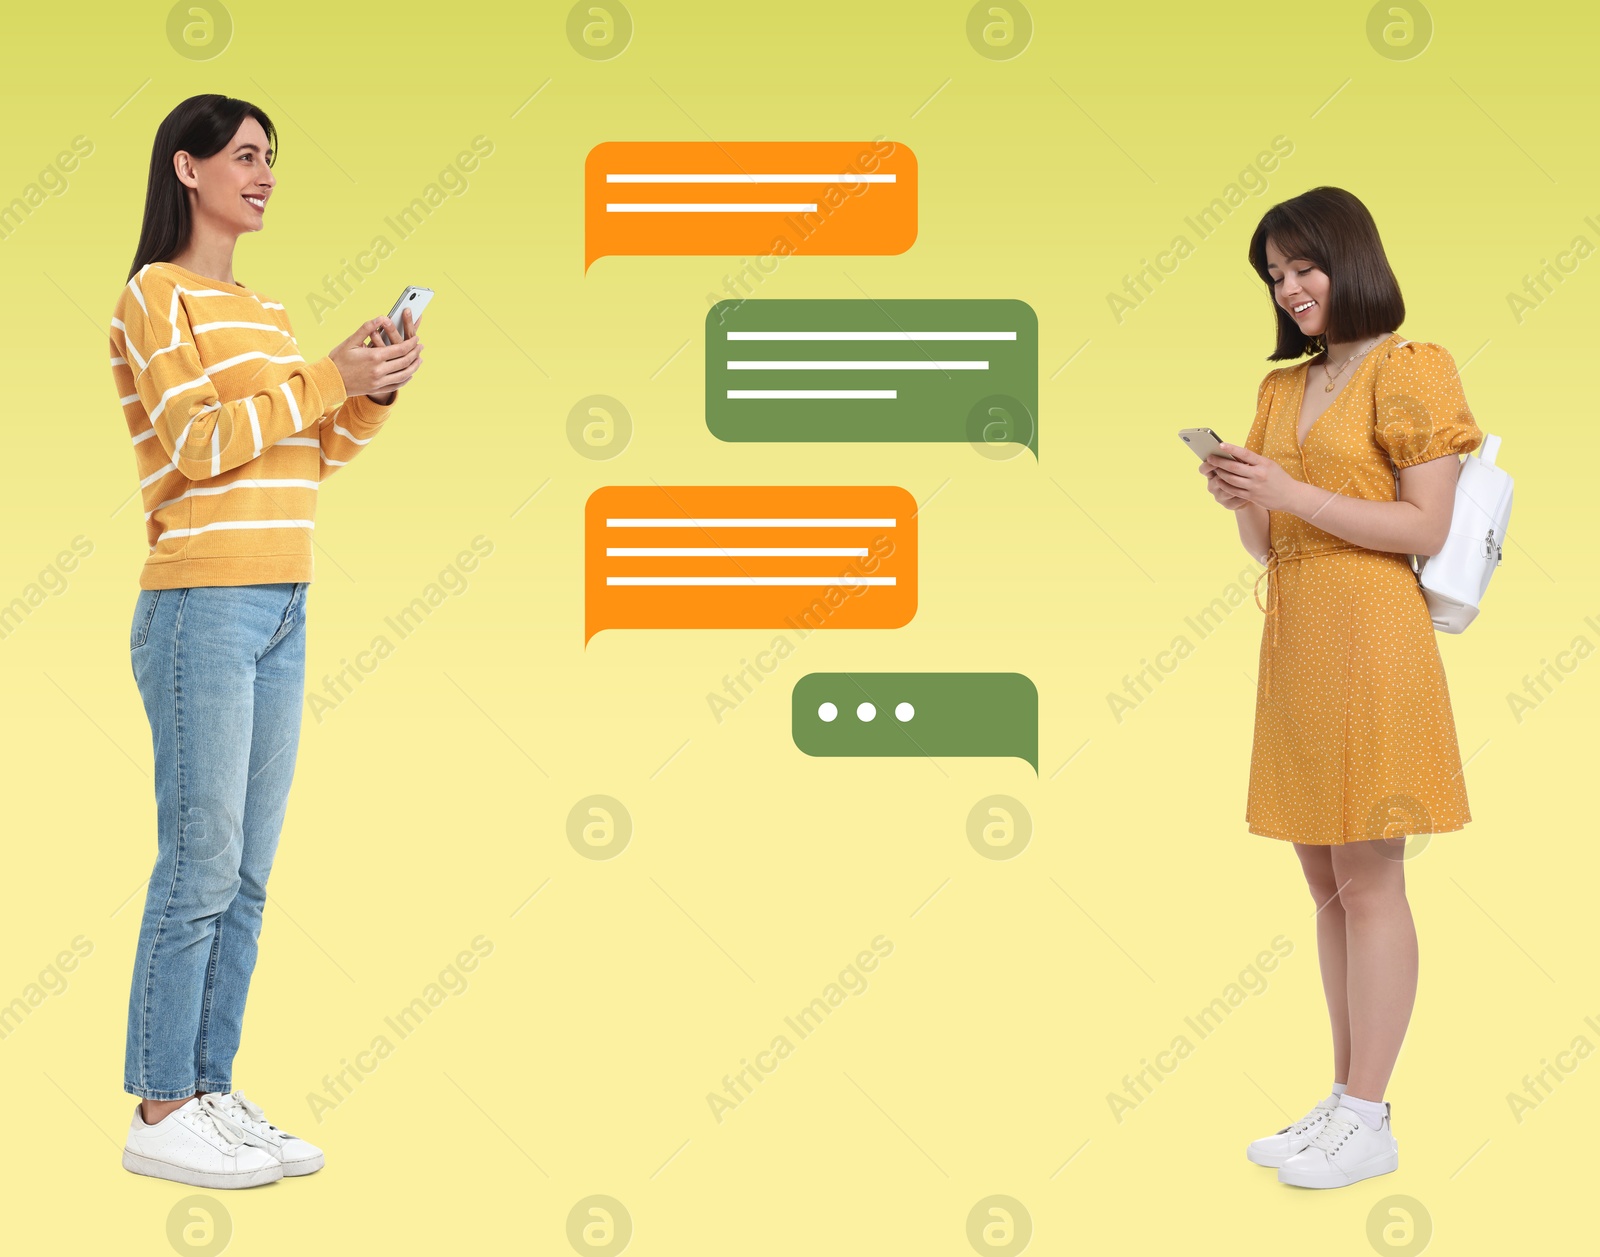 Image of Women with smartphones texting on yellow gradient background. Message bubbles between them